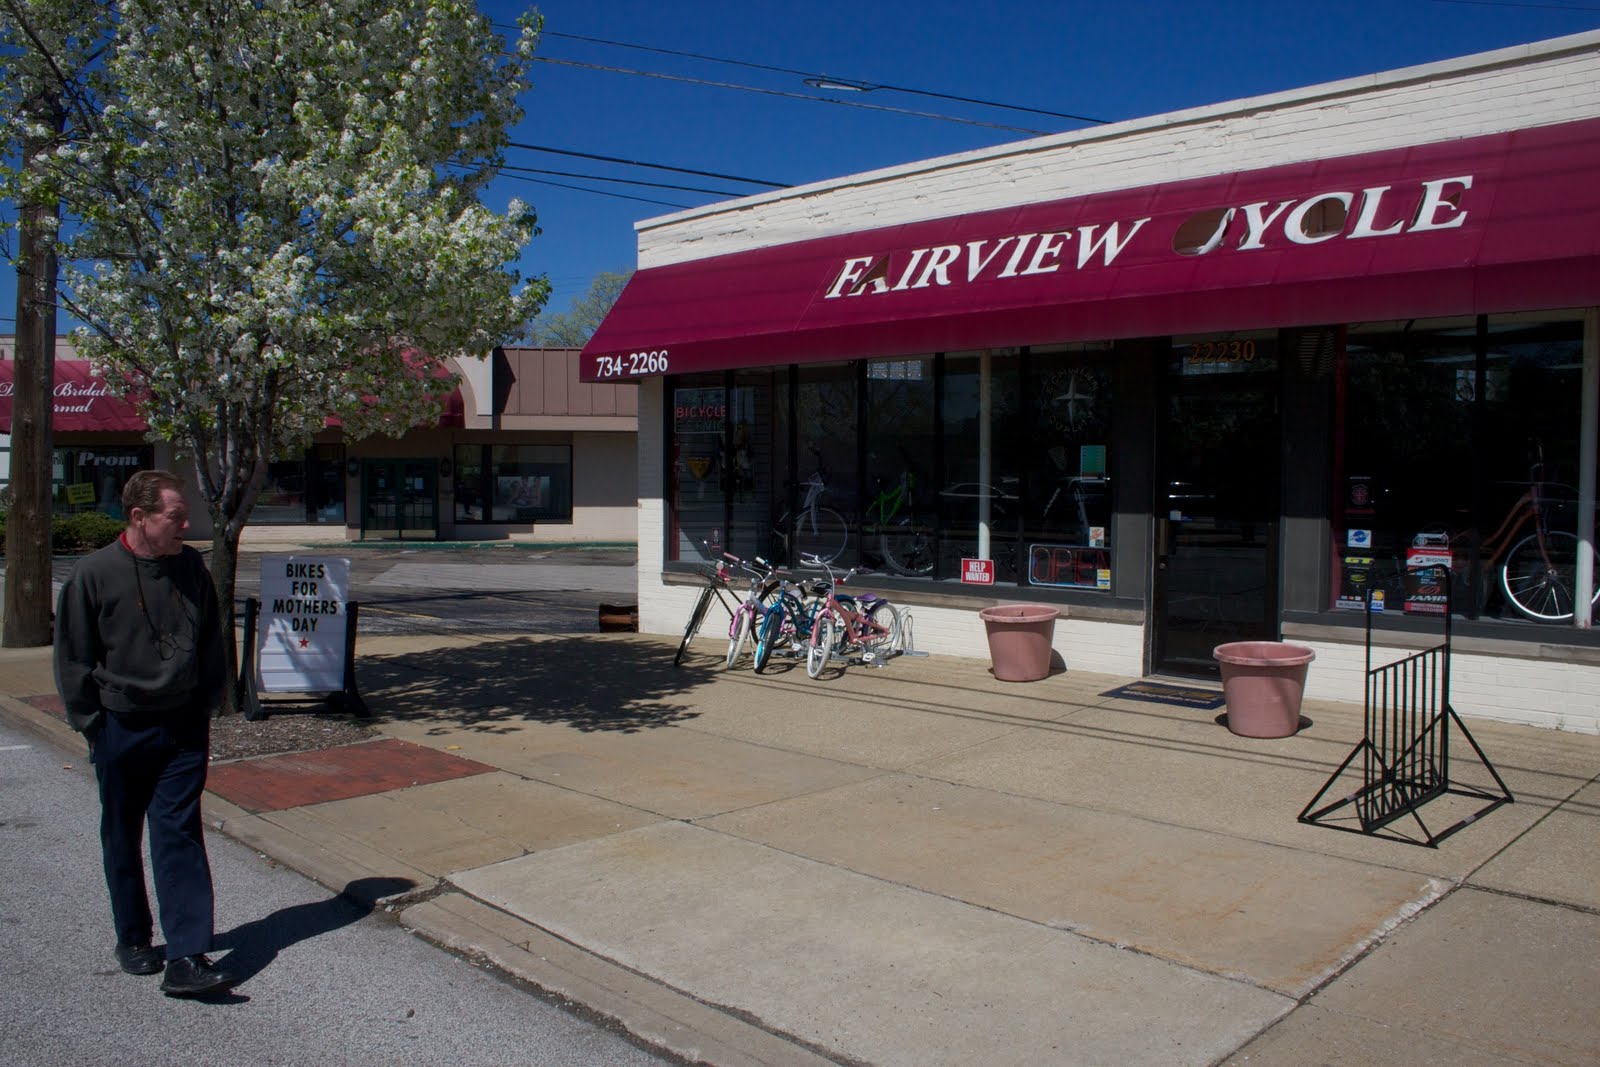 Izip Road Trip: Fairview Cycle - Fairview Park, OH